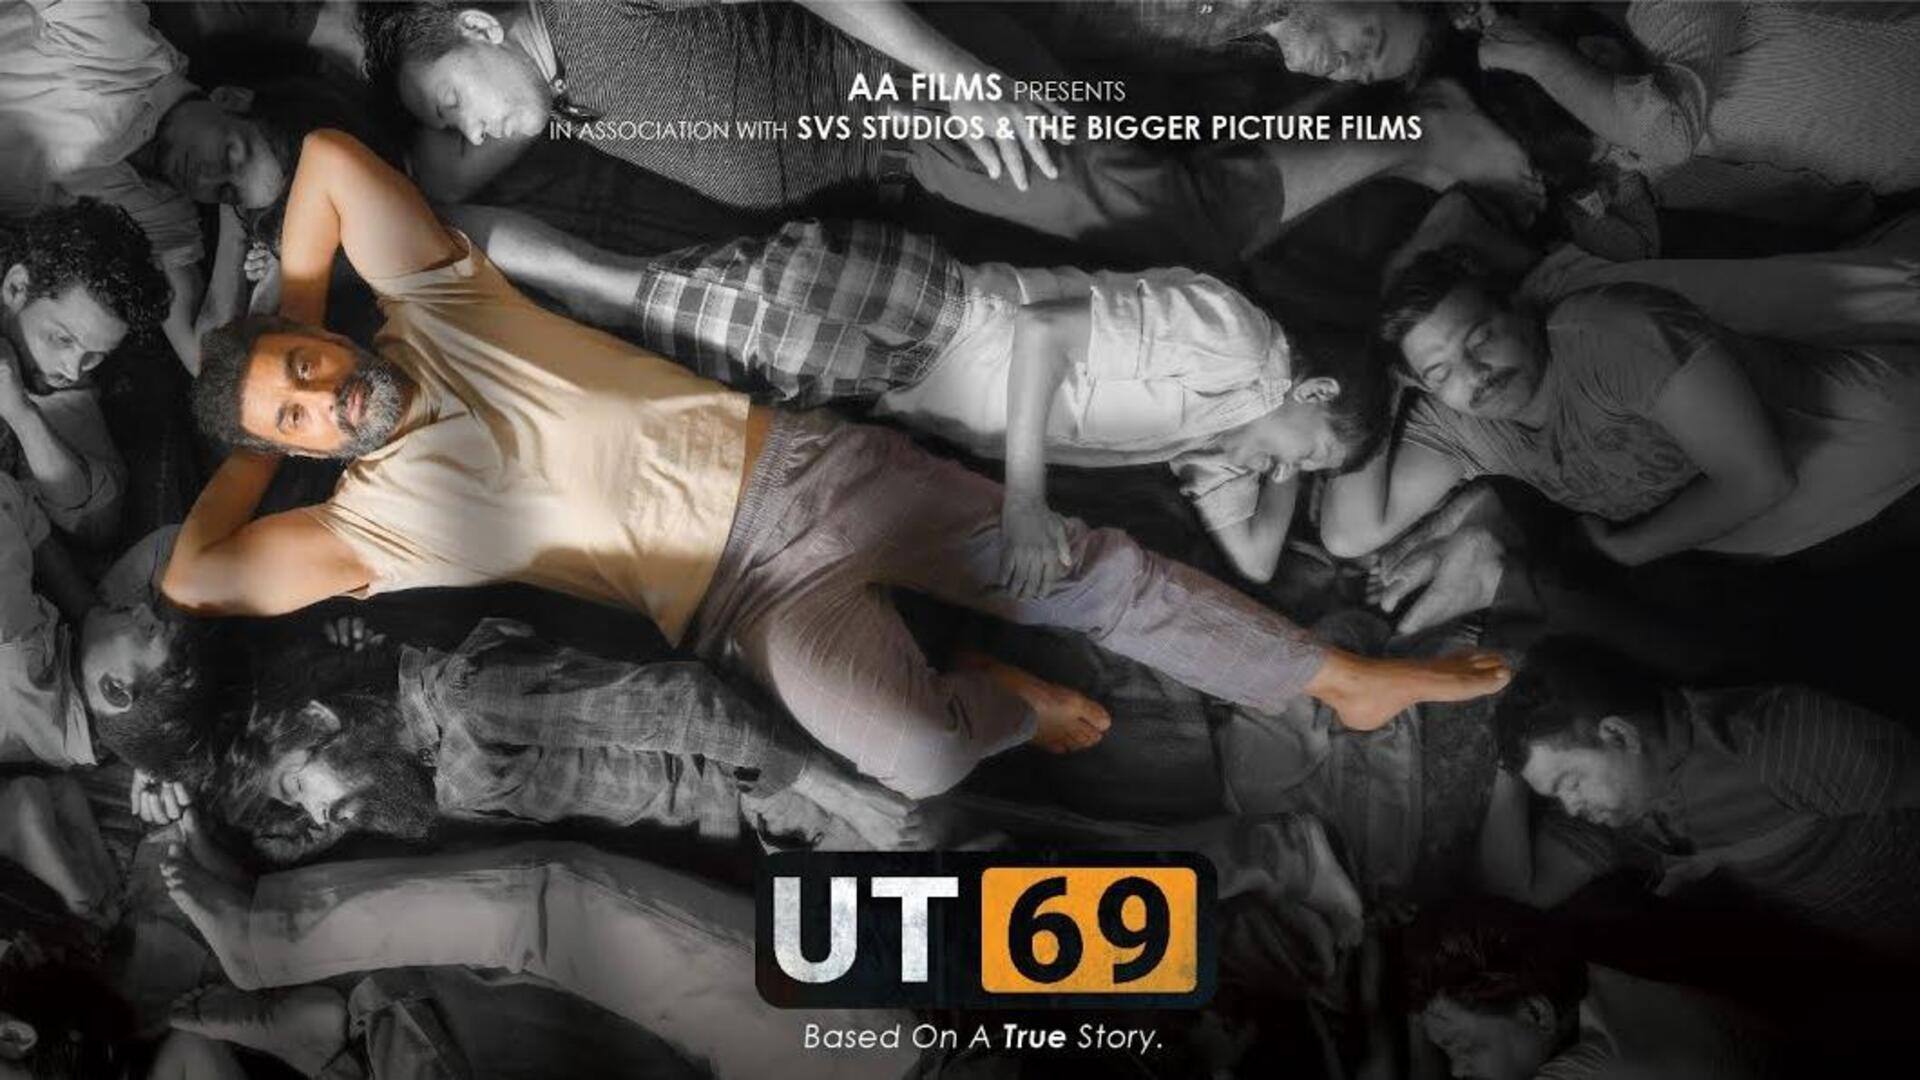 Box office collection: 'UT 69' fails to cross Rs. 1cr